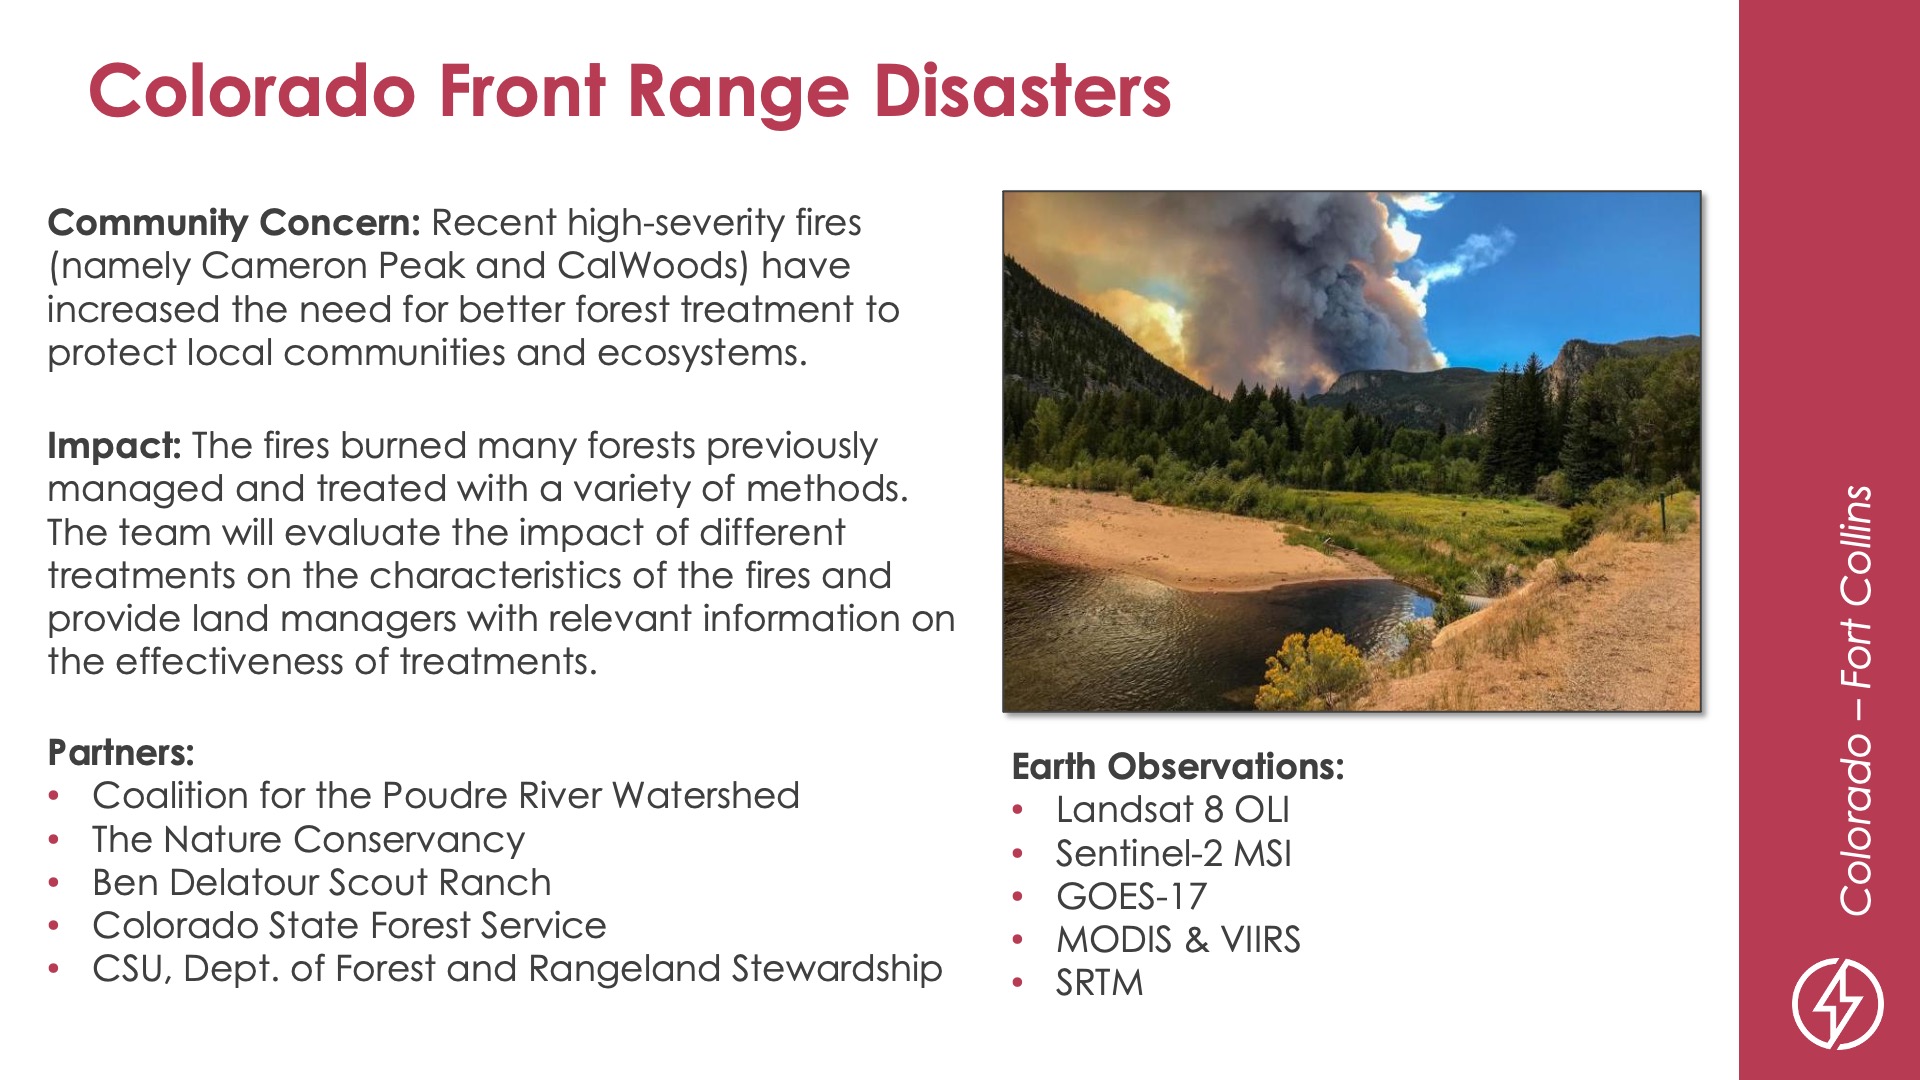 Slide title: Colorado Front Range DisastersDEVELOP Node: Colorado - Fort CollinsCommunity Concern: Recent high-severity fires (namely Cameron Peak and CalWoods) have increased the need for better forest treatment to protect local communities and ecosystems.Impact: The fires burned many forests previously managed and treated with a variety of methods. The team will evaluate the impact of different treatments on the characteristics of the fires and provide land managers with relevant information on the effectiveness of treatments.Partners: Coalition for the Poudre River Watershed, The Nature Conservancy, Ben Delatour Scout Ranch, Colorado State Forest Service, CSU Dept. of Forest and Rangeland StewardshipEarth Observations: Landsat 8 OLI, Sentinel-2 MSI, GOES-17, MODIS & VIIRS, SRTM